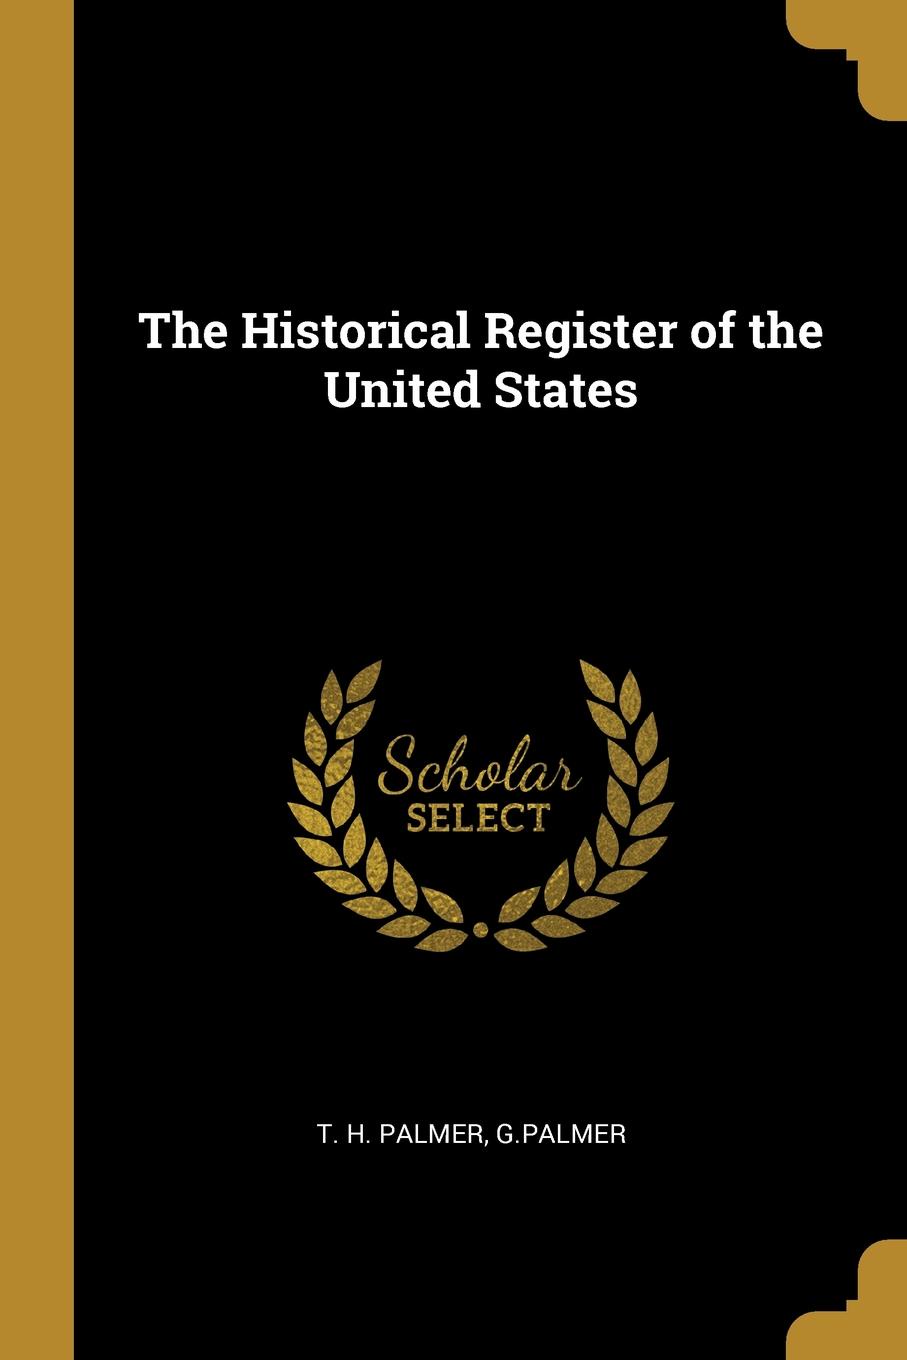 The Historical Register of the United States